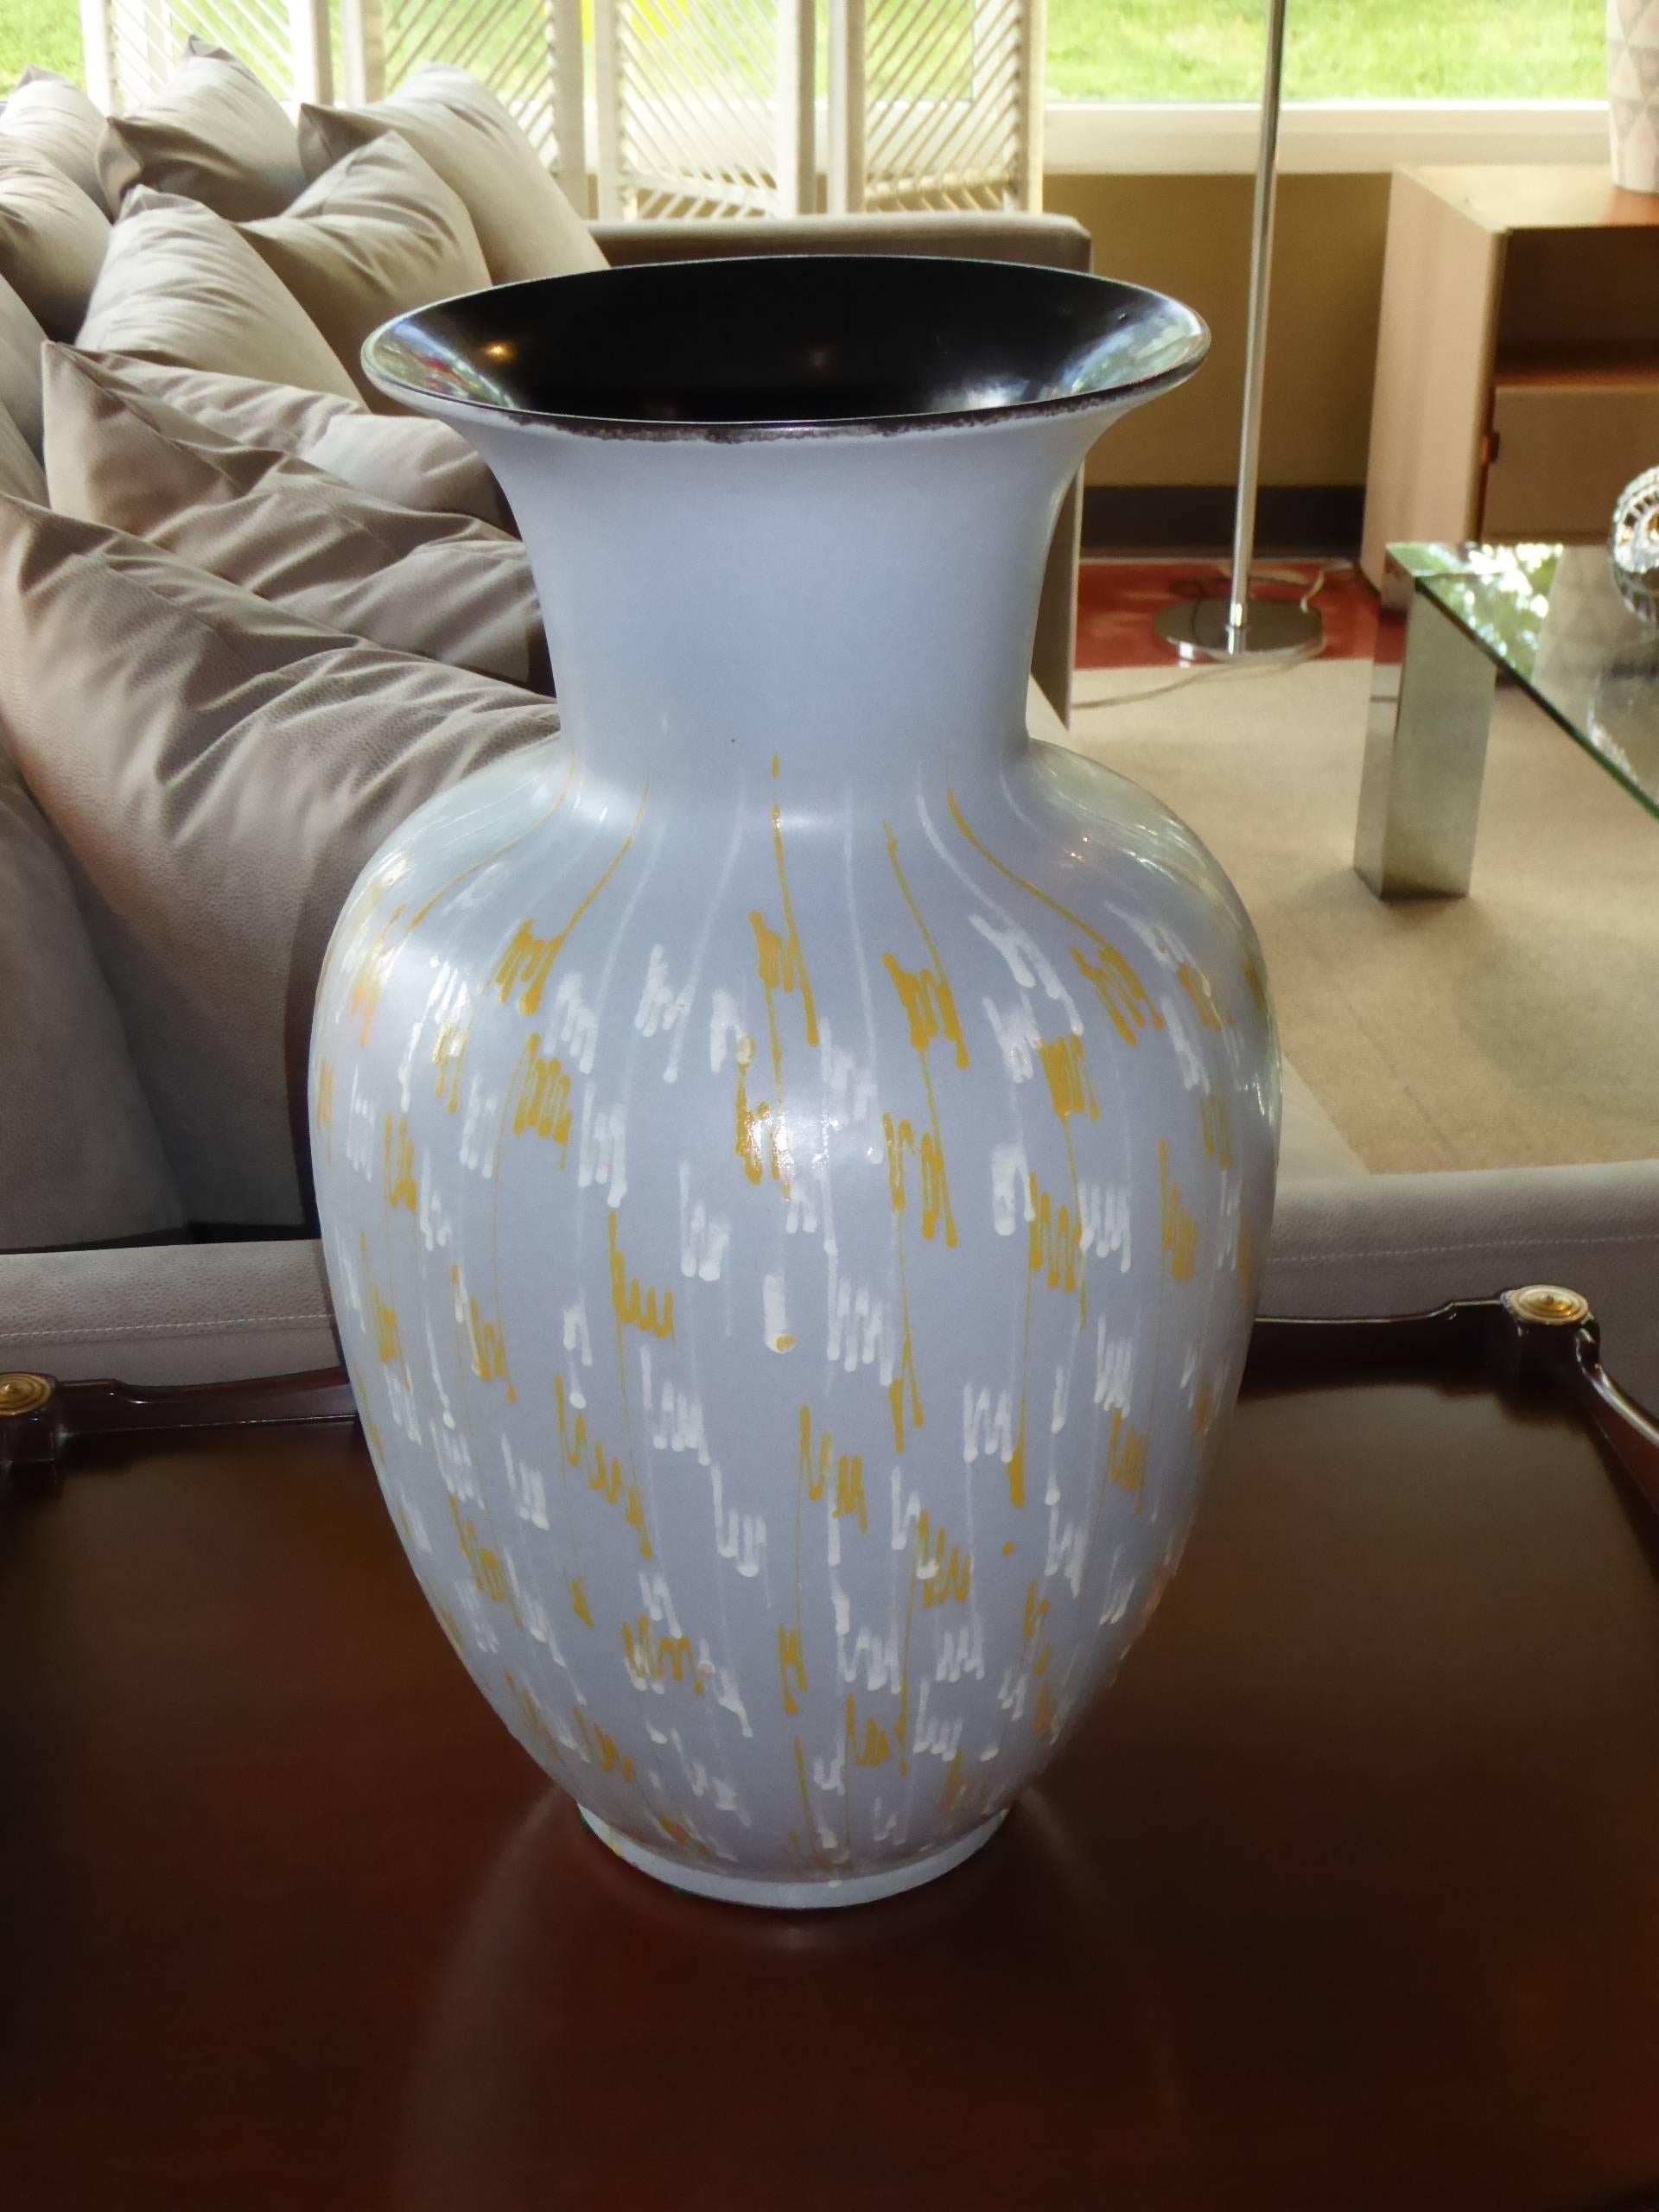 REDUCED FROM $550....Classic urn shaped and with 1950s period dribble glaze decoration, this massive 1956 Carstens pottery floor vase is a delight. Grey glazed exterior with white and yellow squiggles and an interior black gun metal glaze. Scale is